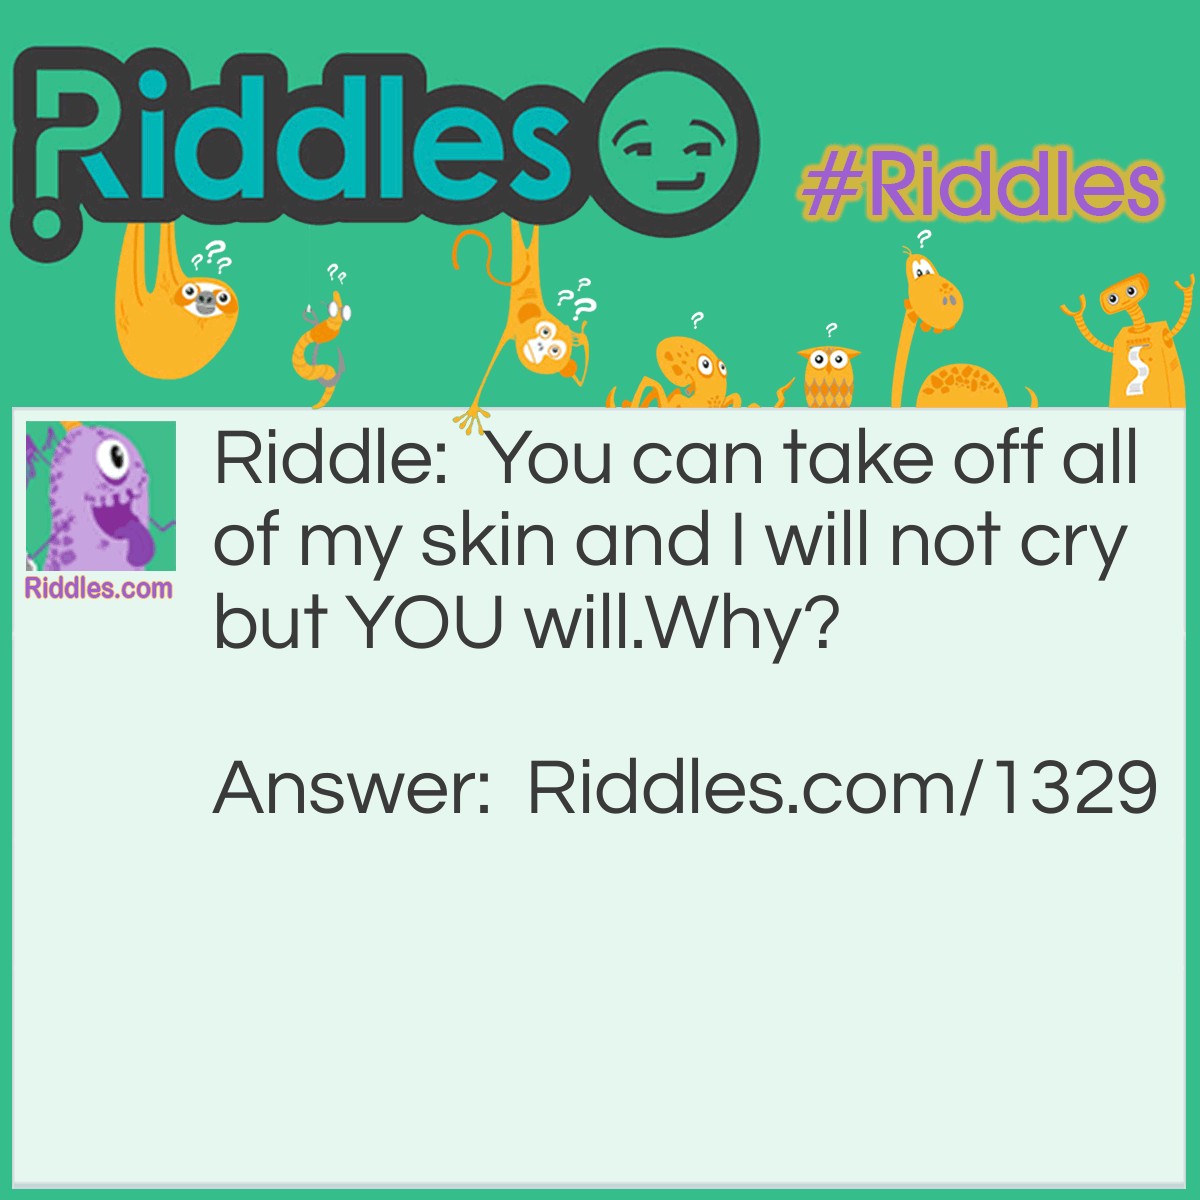 Riddle: You can take off all of my skin and I will not cry but YOU will.
Why? Answer: I'm an onion.